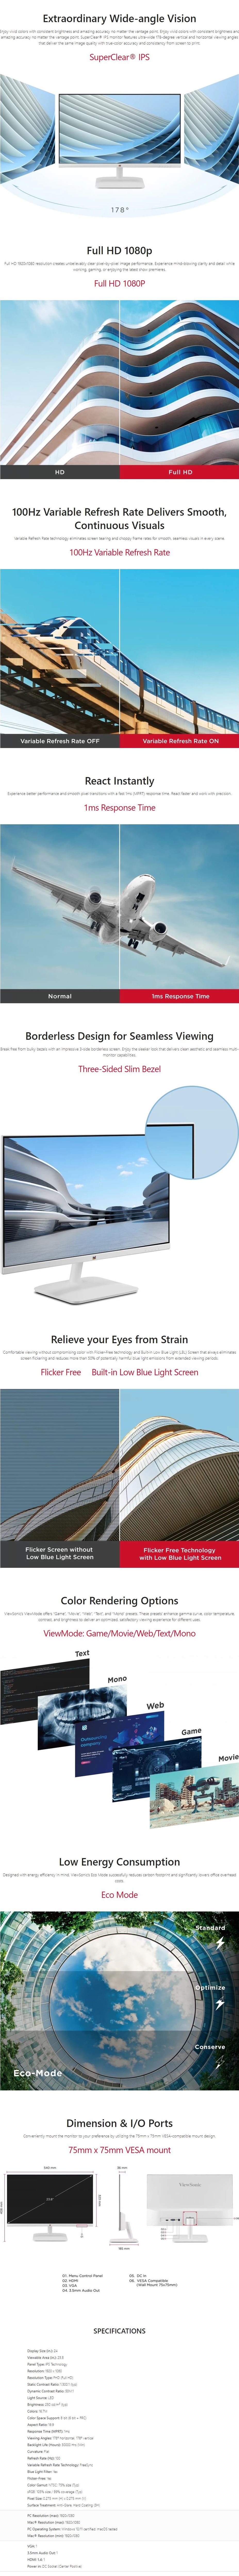 A large marketing image providing additional information about the product ViewSonic VA2432-H-W 24" FHD 100Hz IPS Monitor - White - Additional alt info not provided